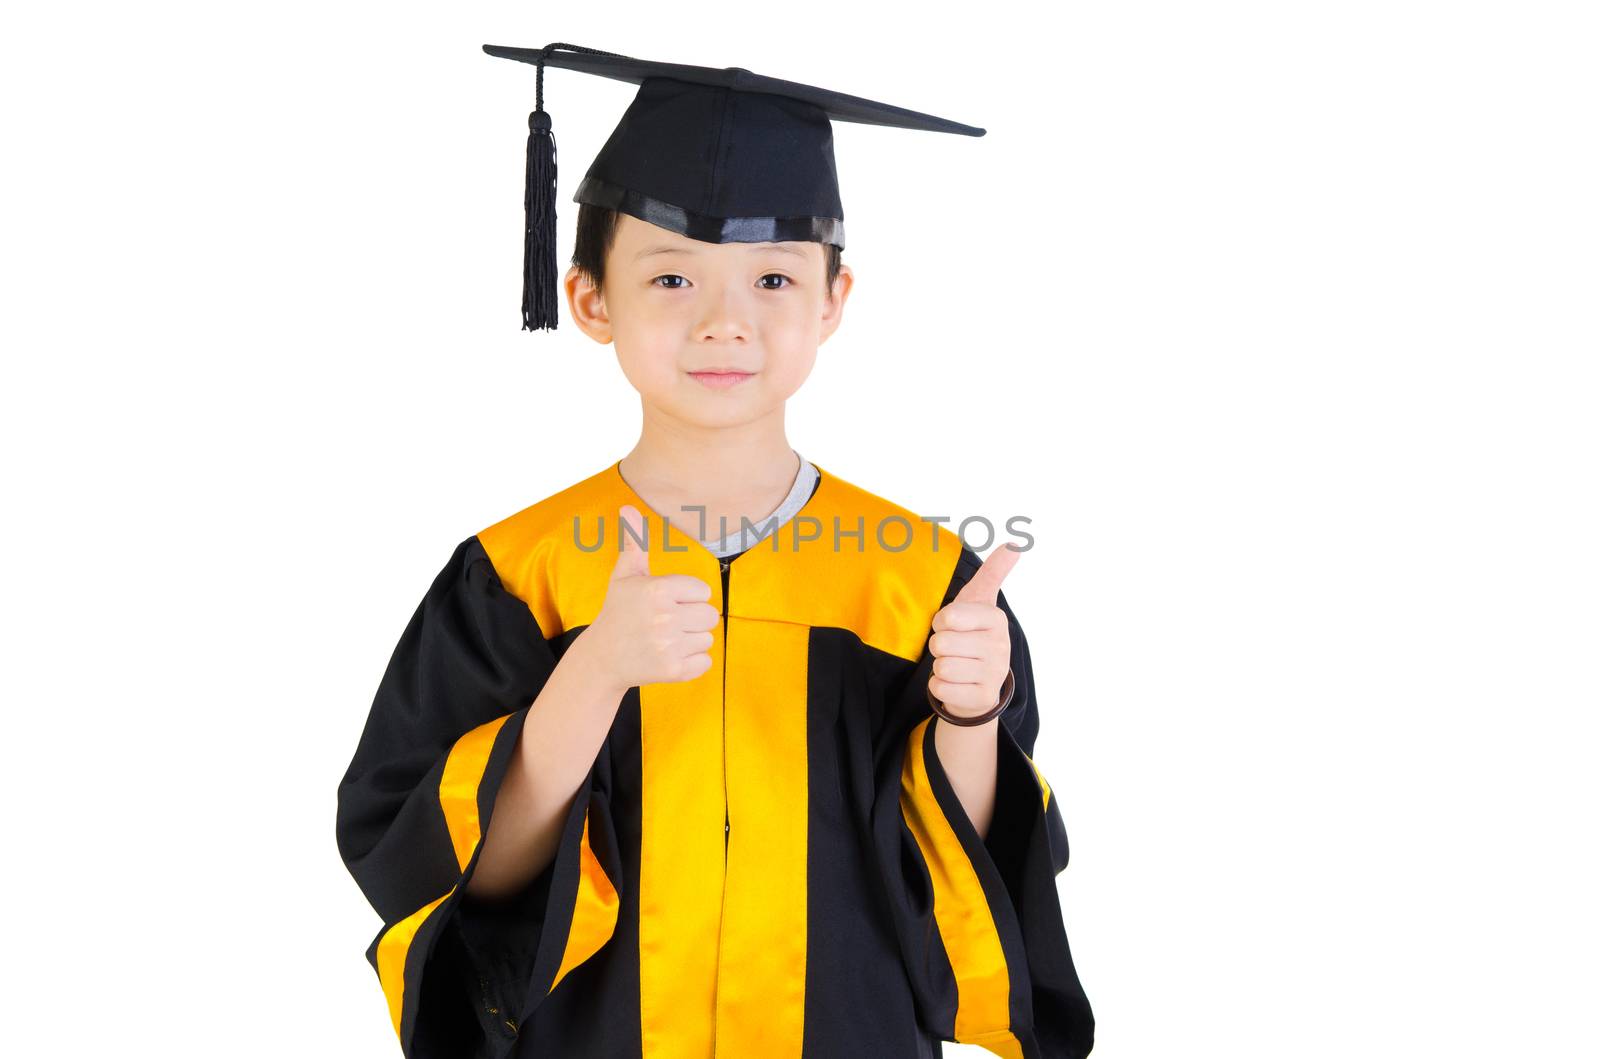 Asian kid in graduation gown in white background